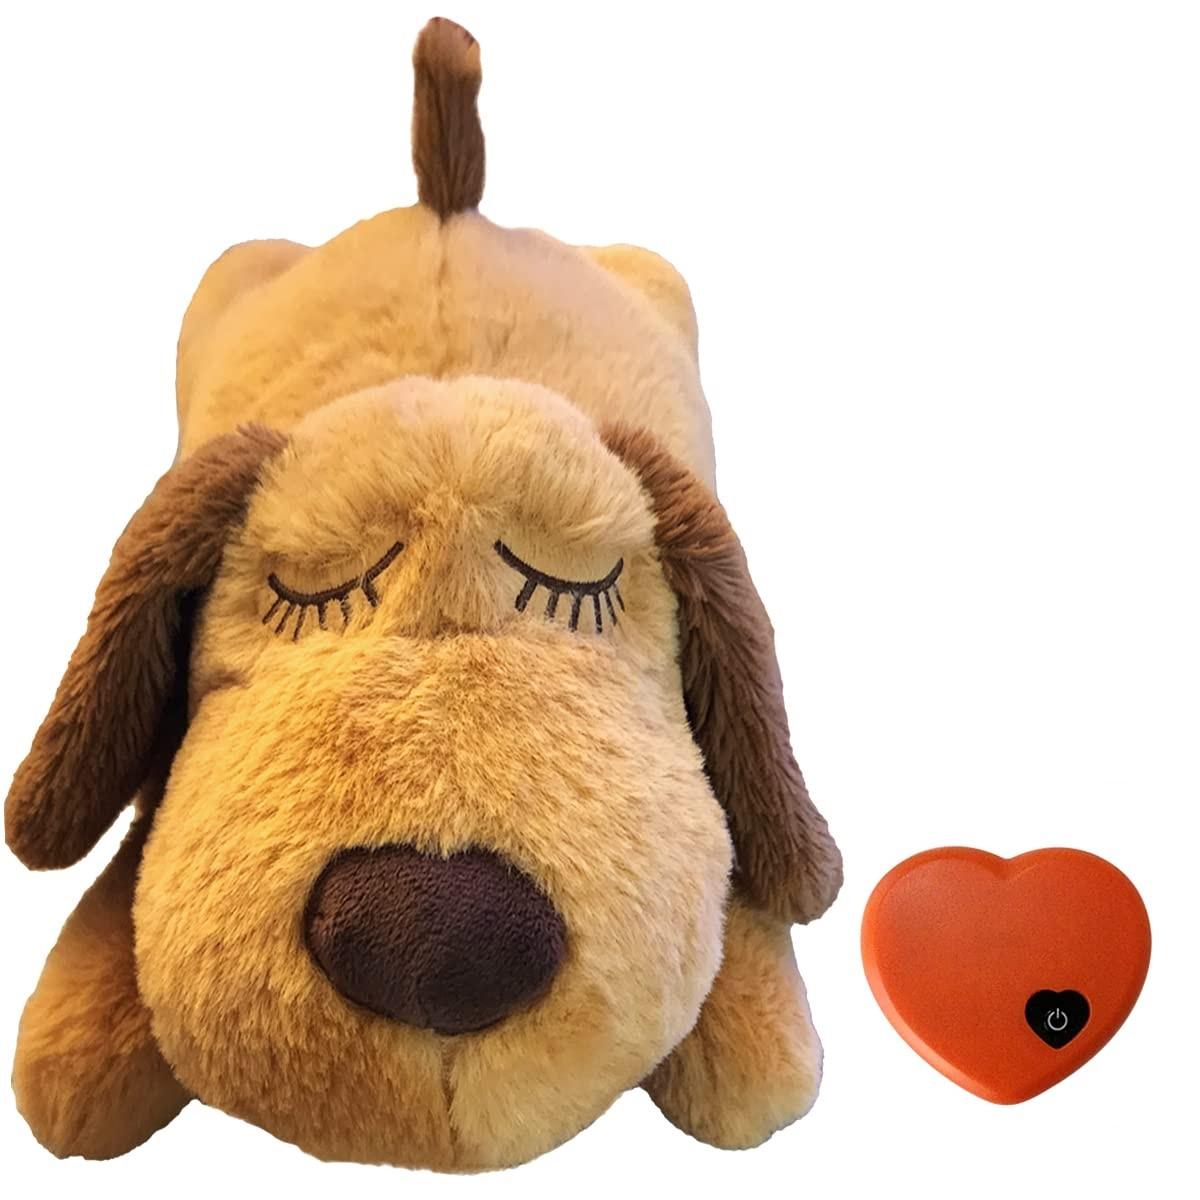 heartbeat dog toy for puppy heartbeat stuffed animal Squeaky Toy Dogs Pet Anxiety Relief and Calming Aid Plush Dog Heartbeat Toy